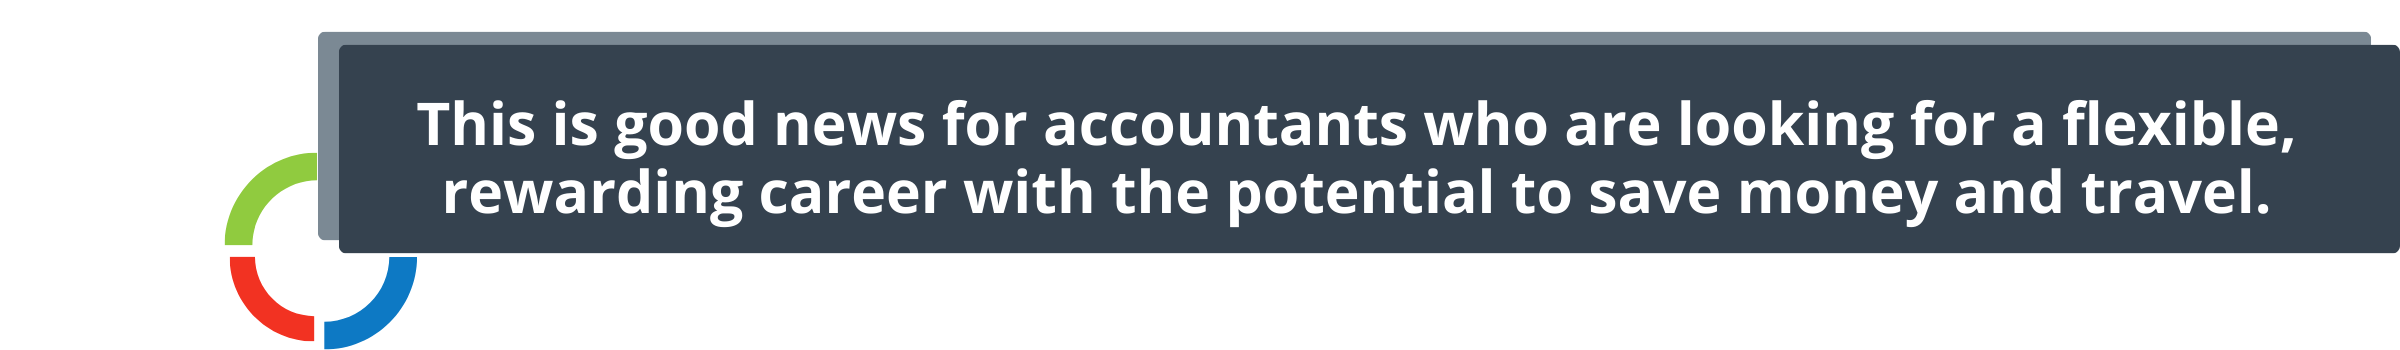 Banner with the text: 'This is good news for accountants who are looking for a flexible, rewarding career with the potential to save money and travel,' along with the Fusion CPA logo.